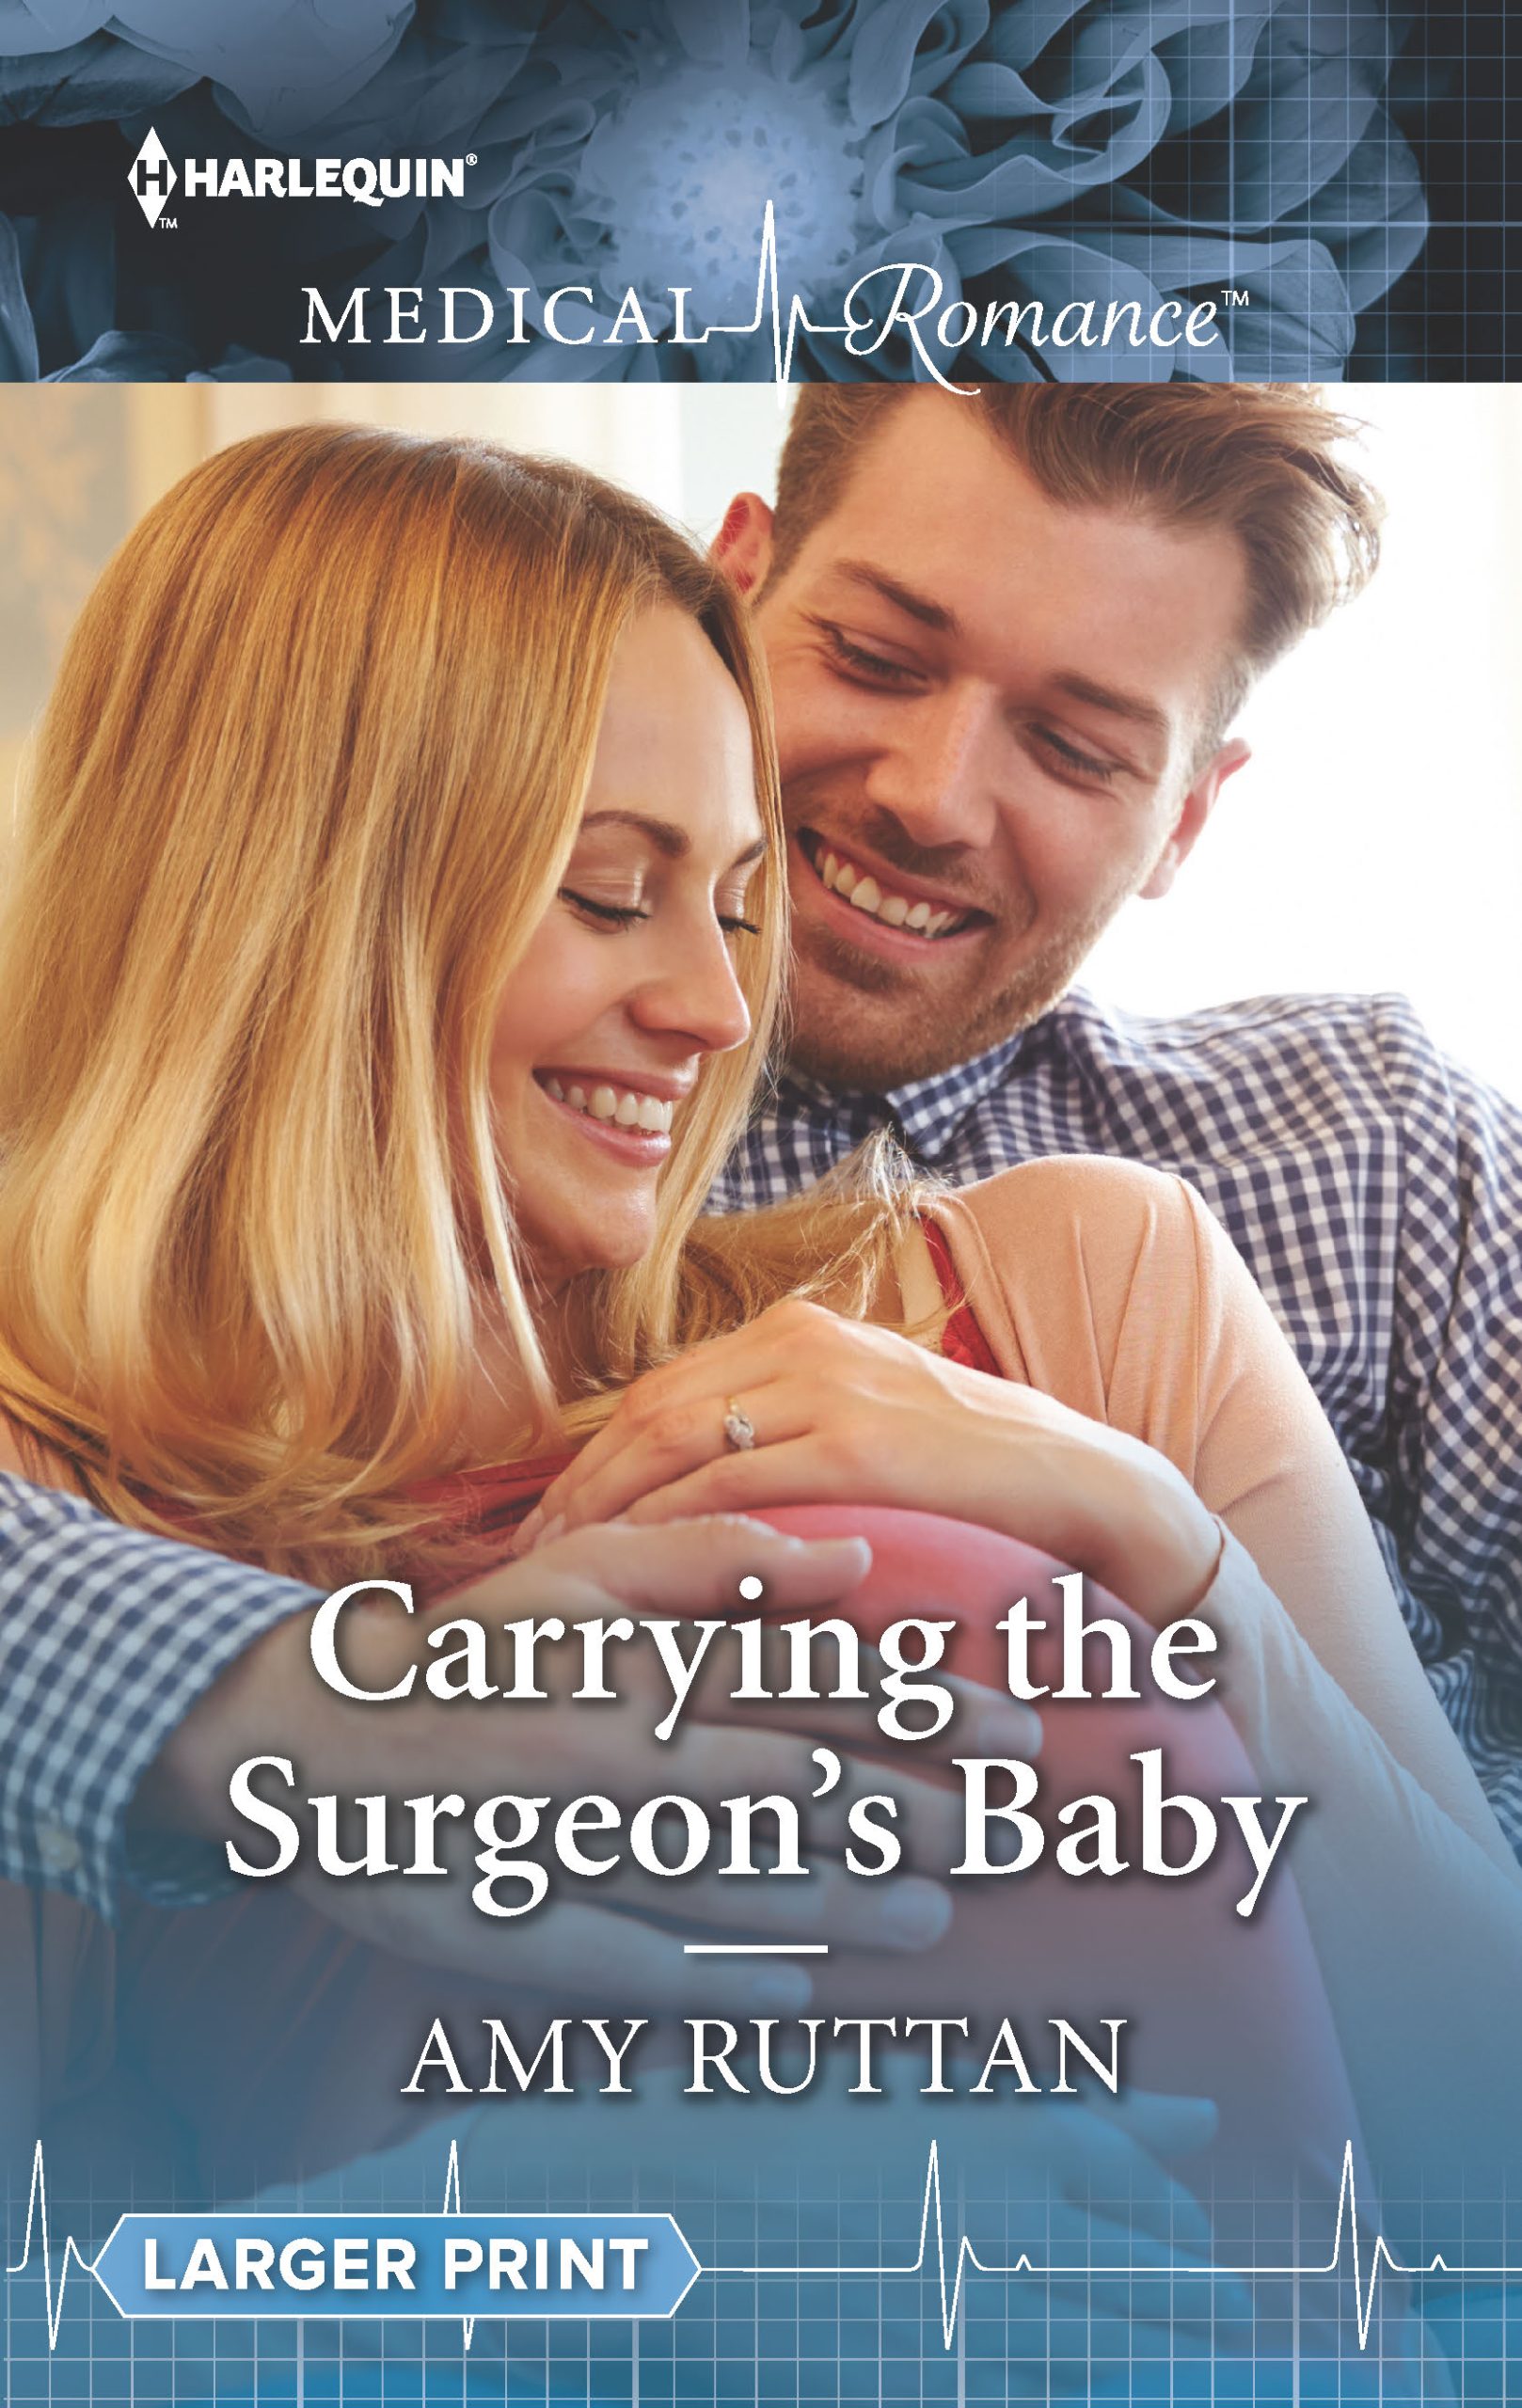 Book Cover for Carrying the Surgeon's Baby by Amy Ruttan